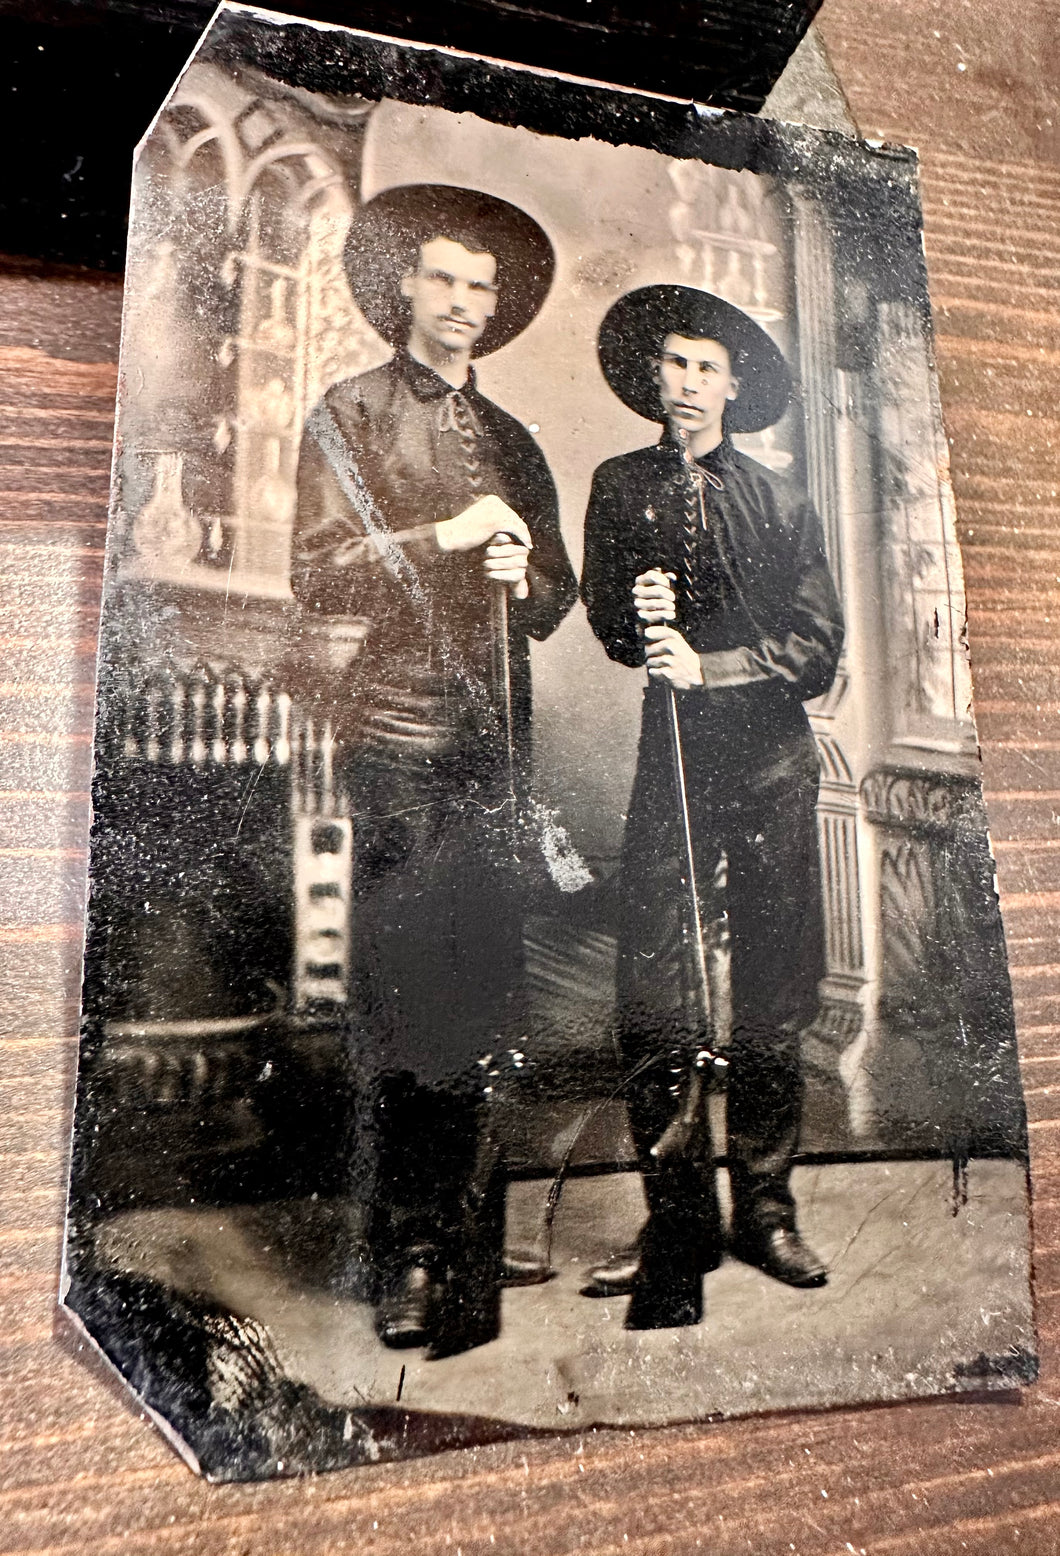 Antique Western Tintype Photo / Armed Cowboys with Rifles & Matching Outfits